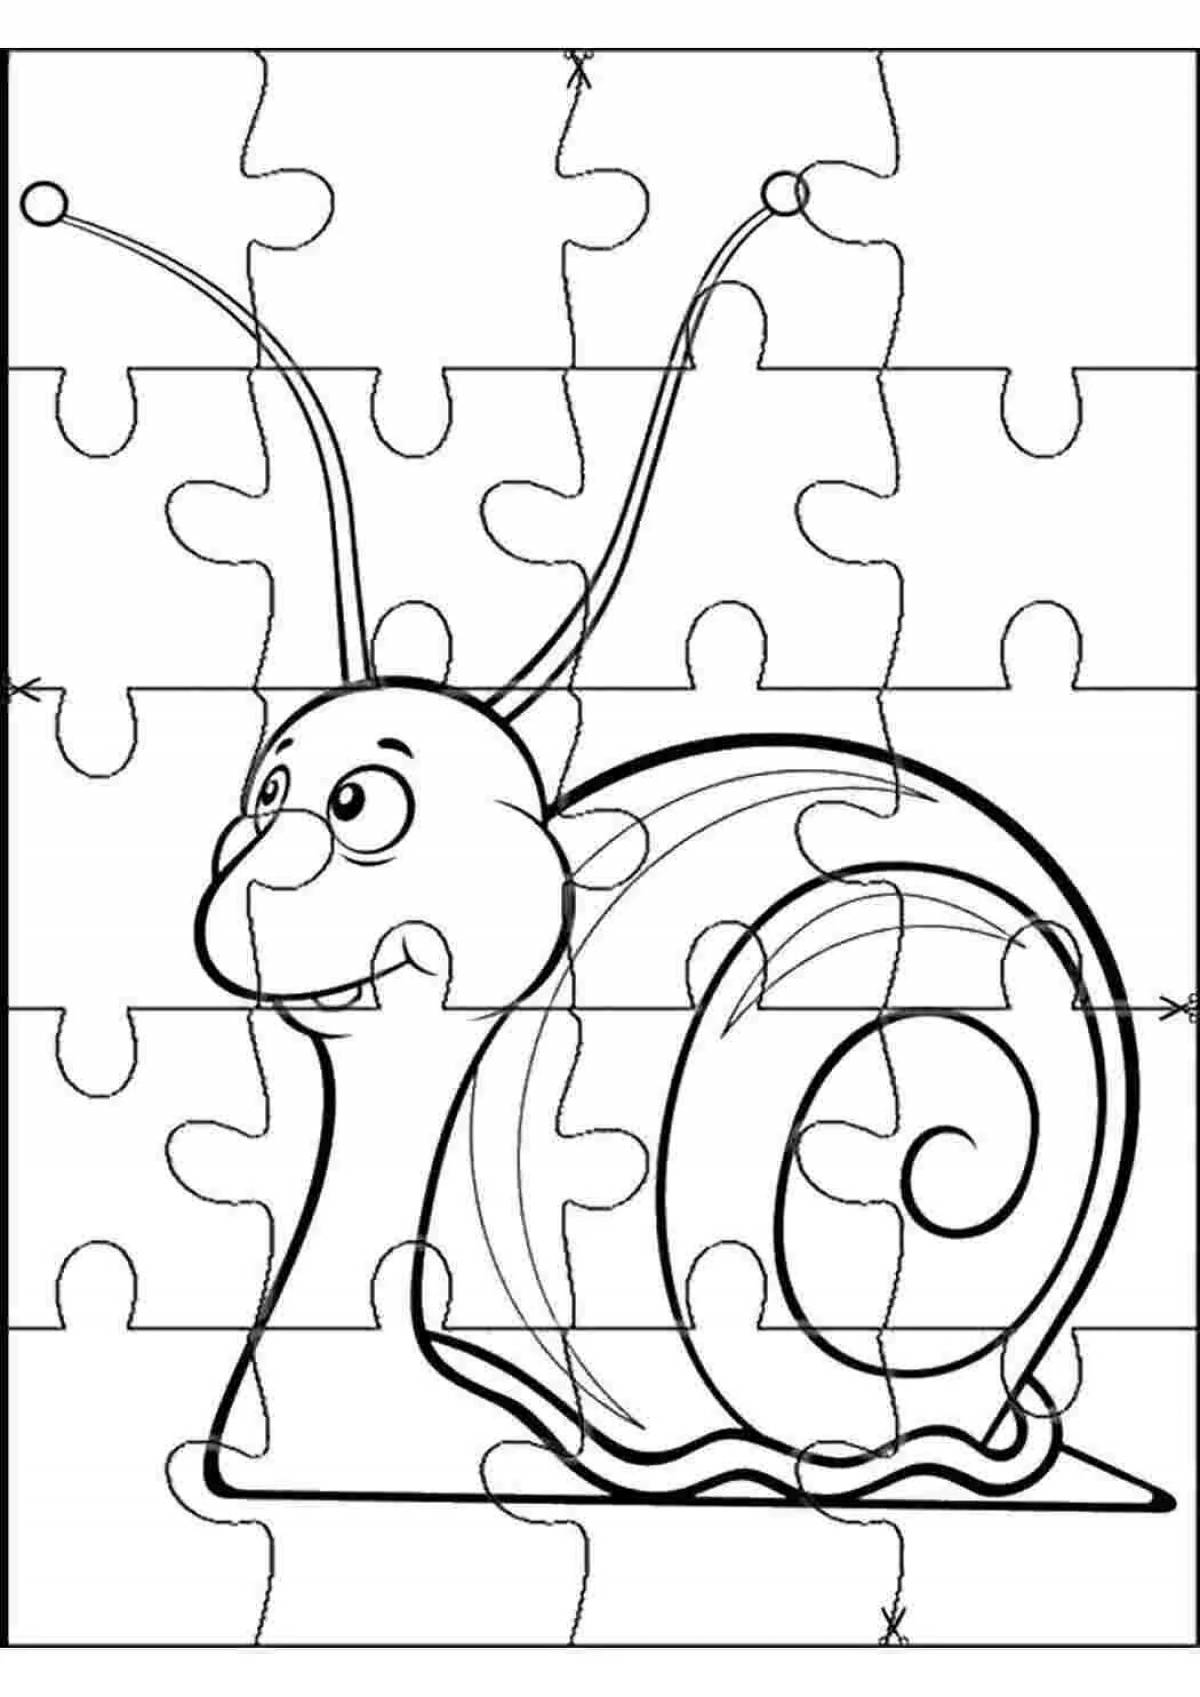 Puzzle for kids #1